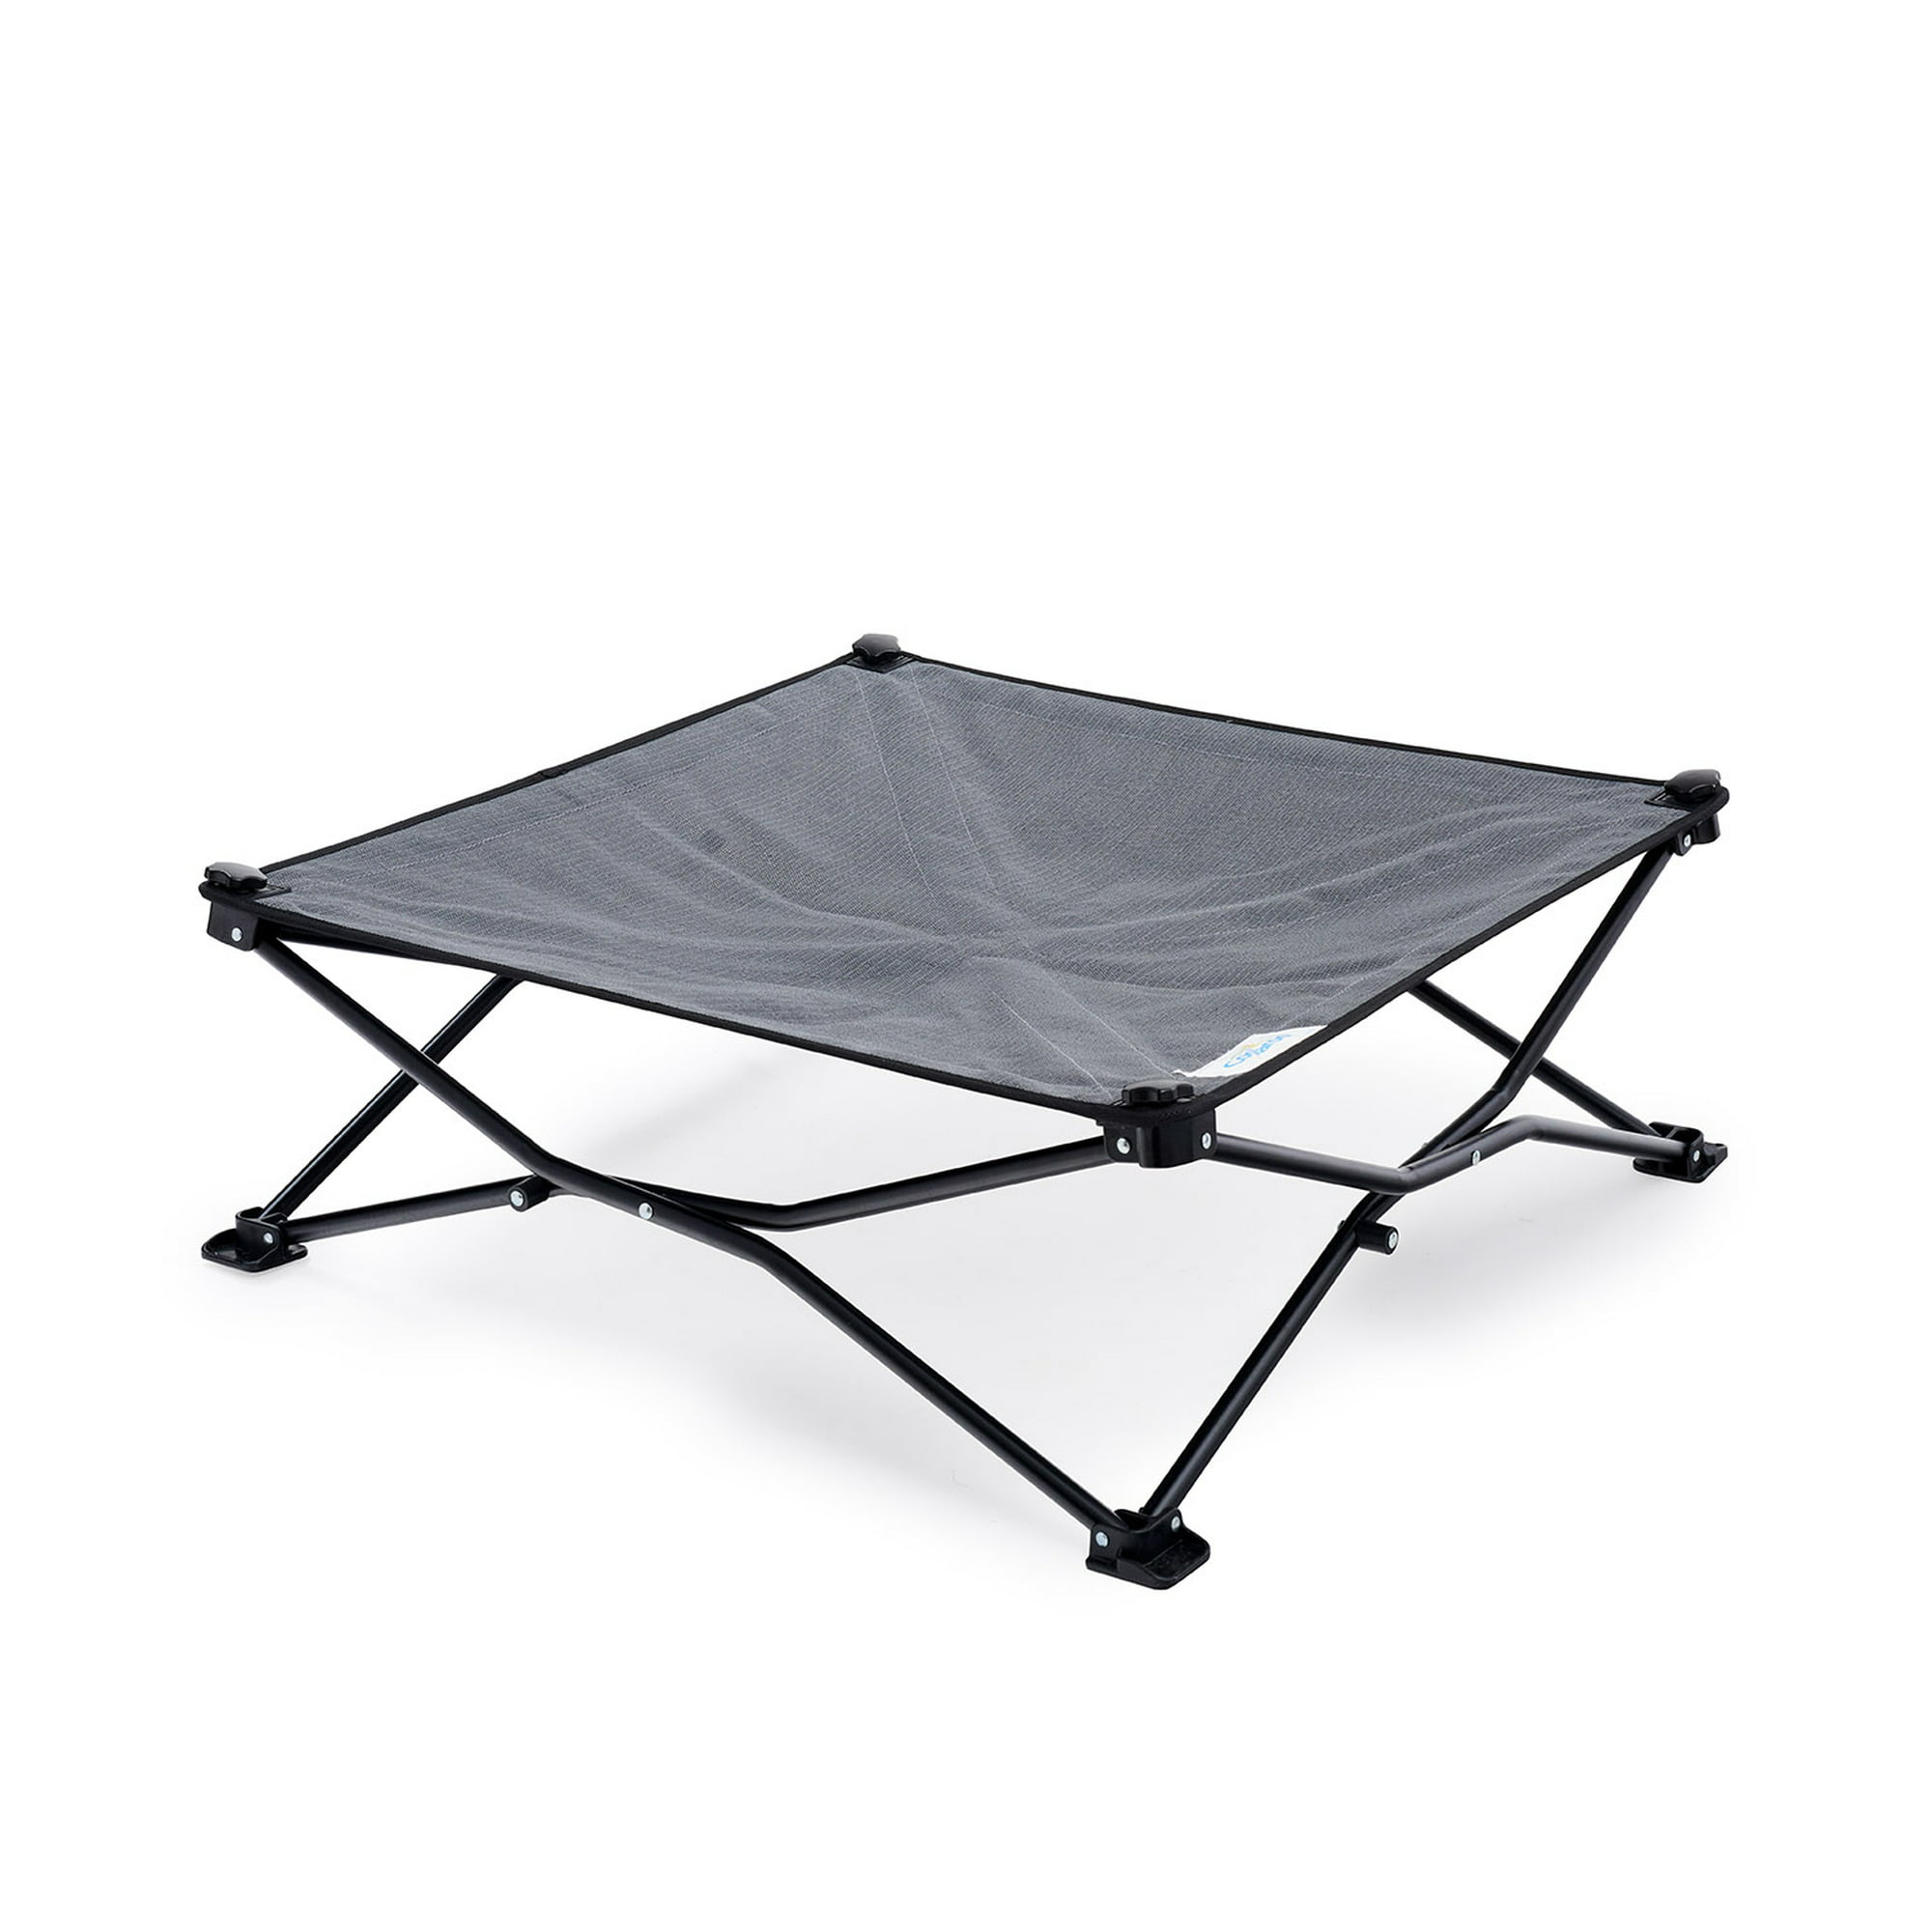 Coolaroo On the Go Foldable Elevated Travel Dog Bed (Medium, Steel Grey) $15.45 + Free S&H w/ Walmart+ or $35+